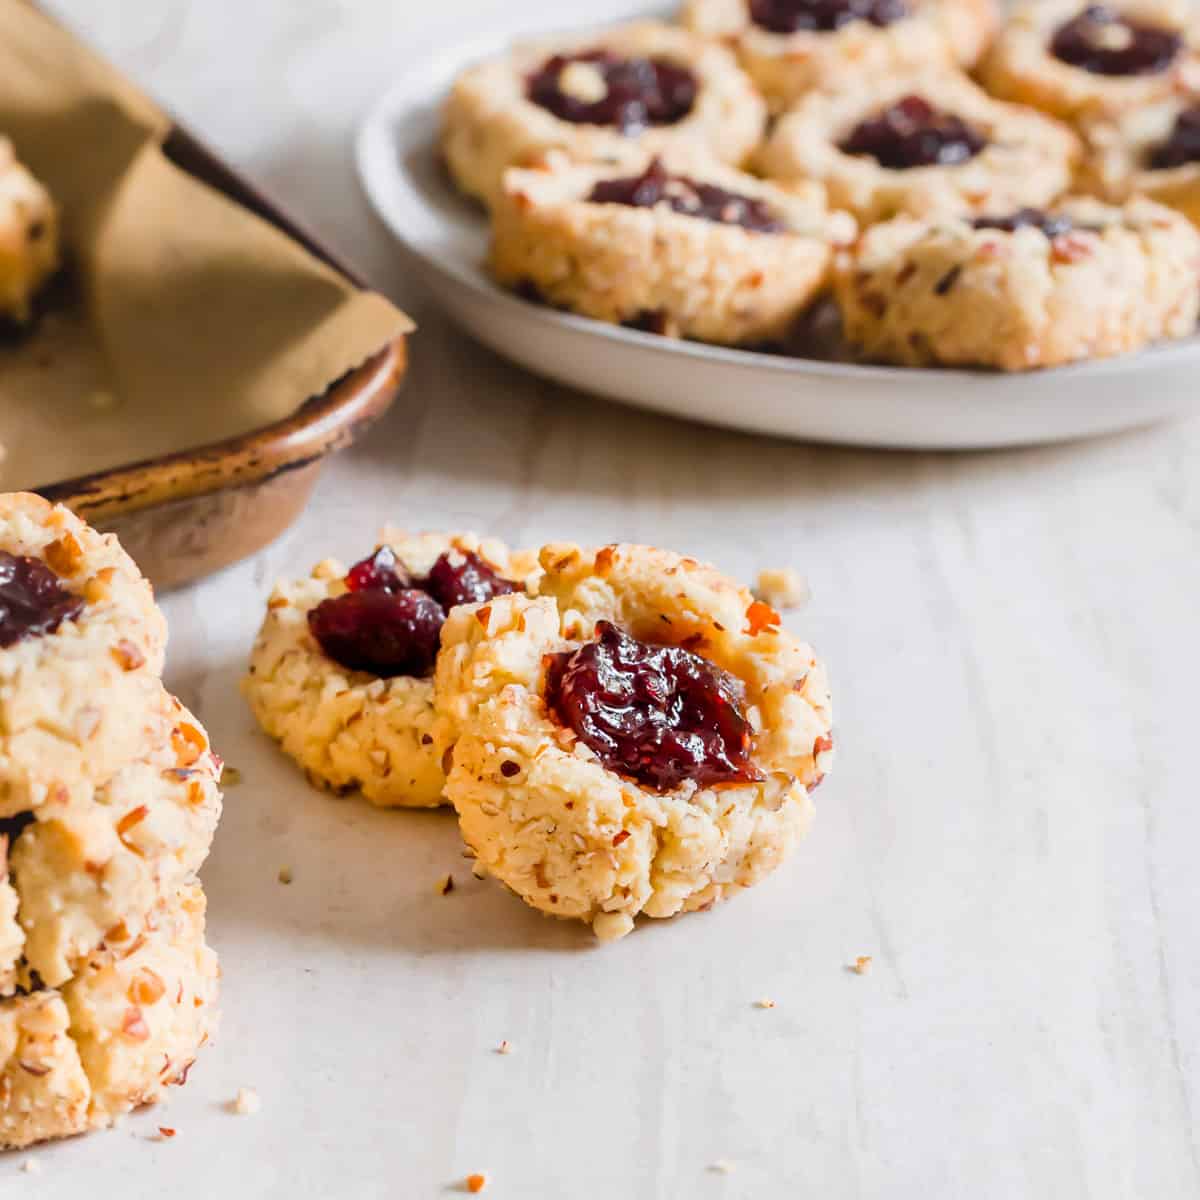 Vegan gluten-free thumbprint cookies with raspberry jam and chopped pecans.